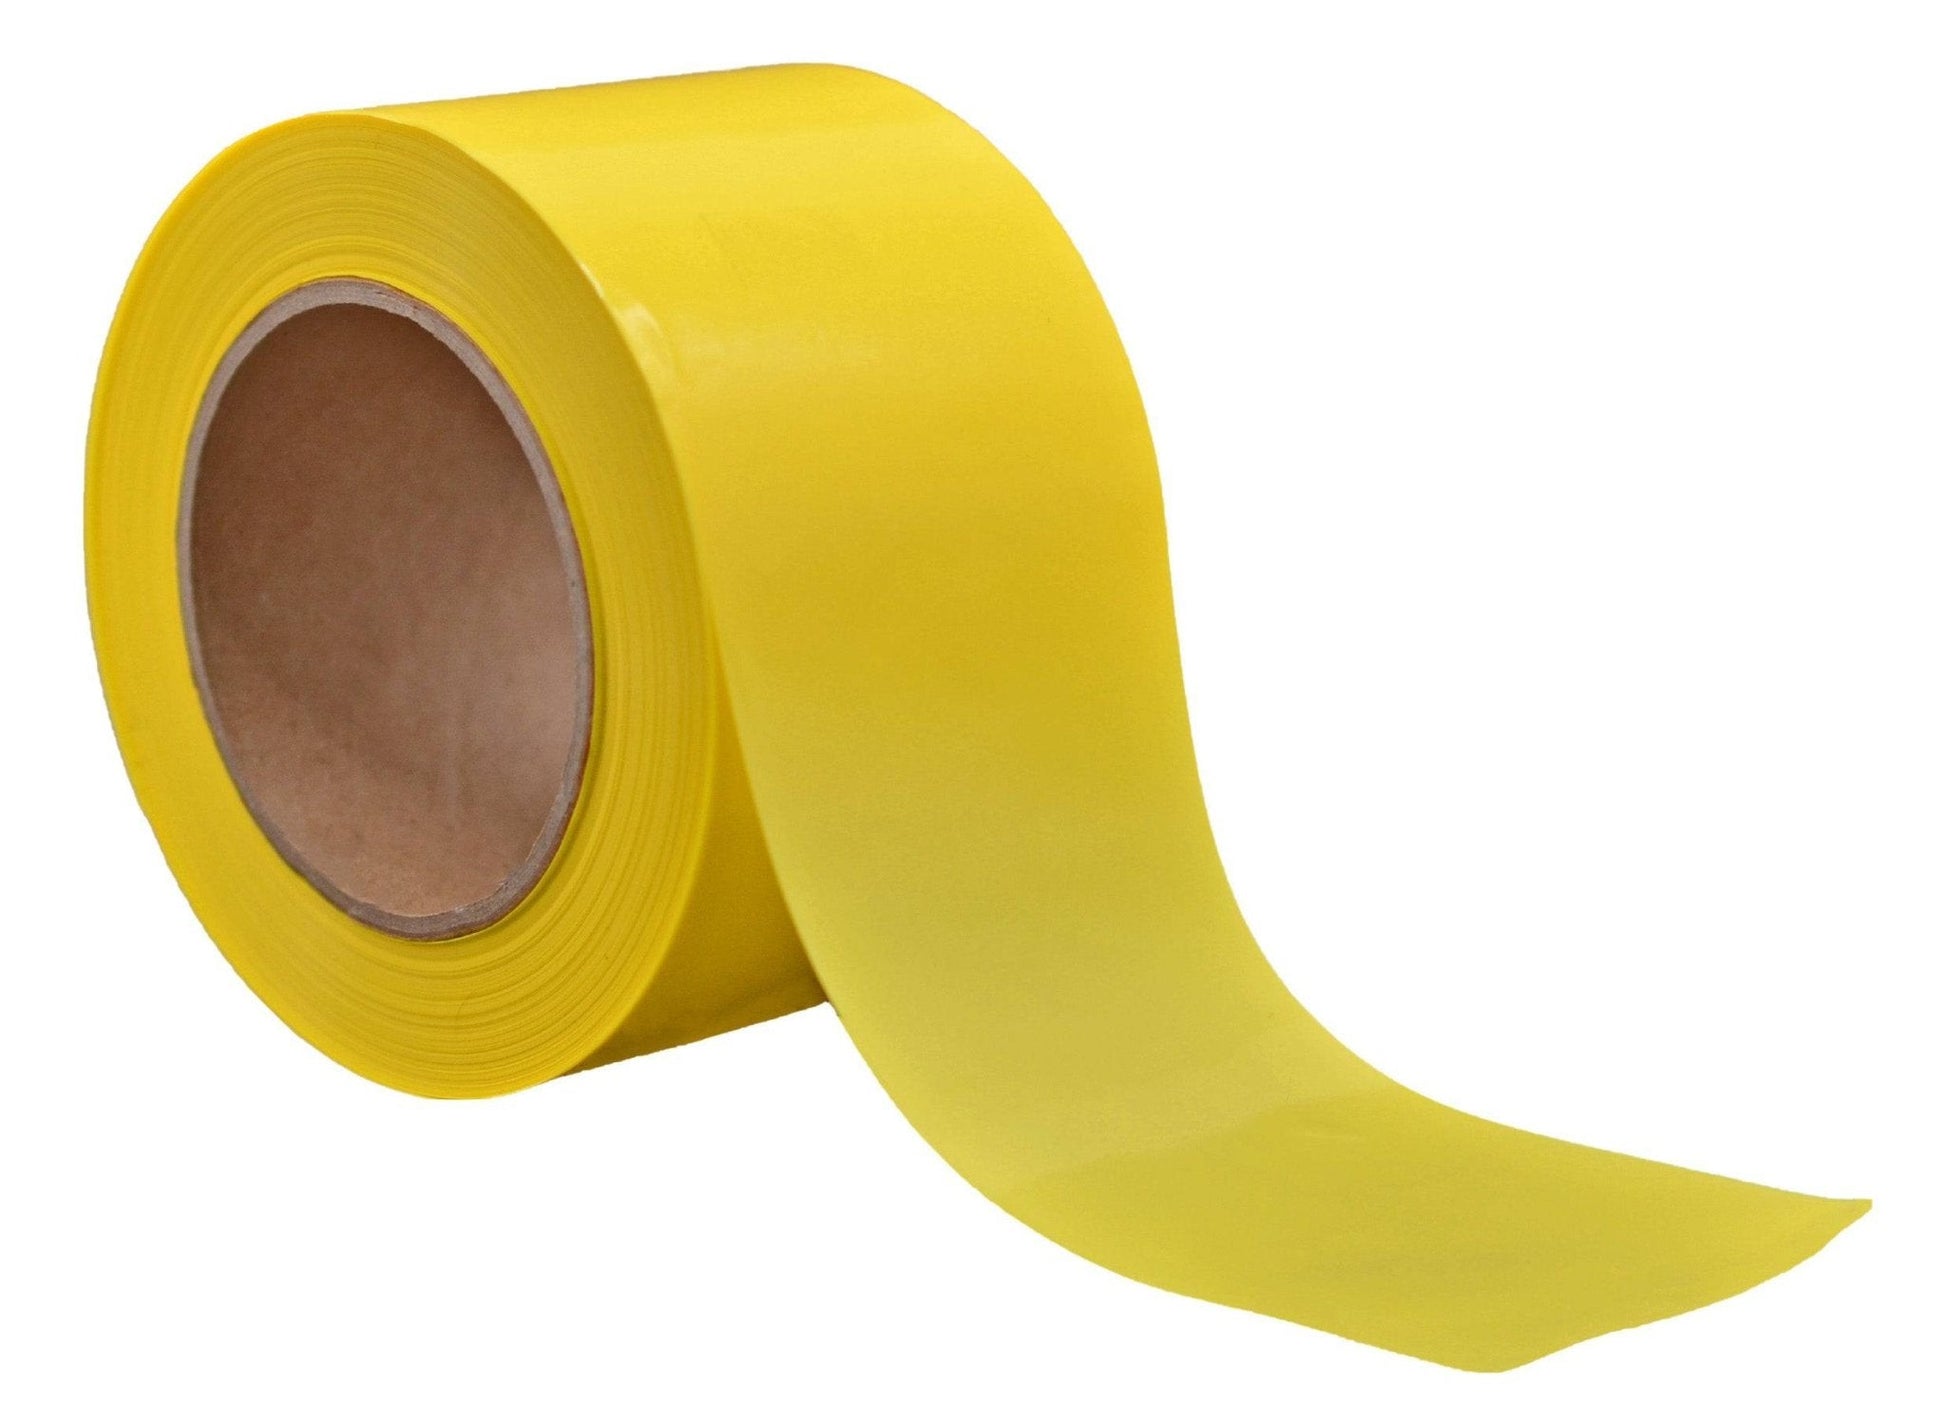 Chief Miller Barricade Tape WOD Colored Barricade Flagging Tape 3 inch - Hazardous Areas, Safety for Construction Zones BRC Apparel